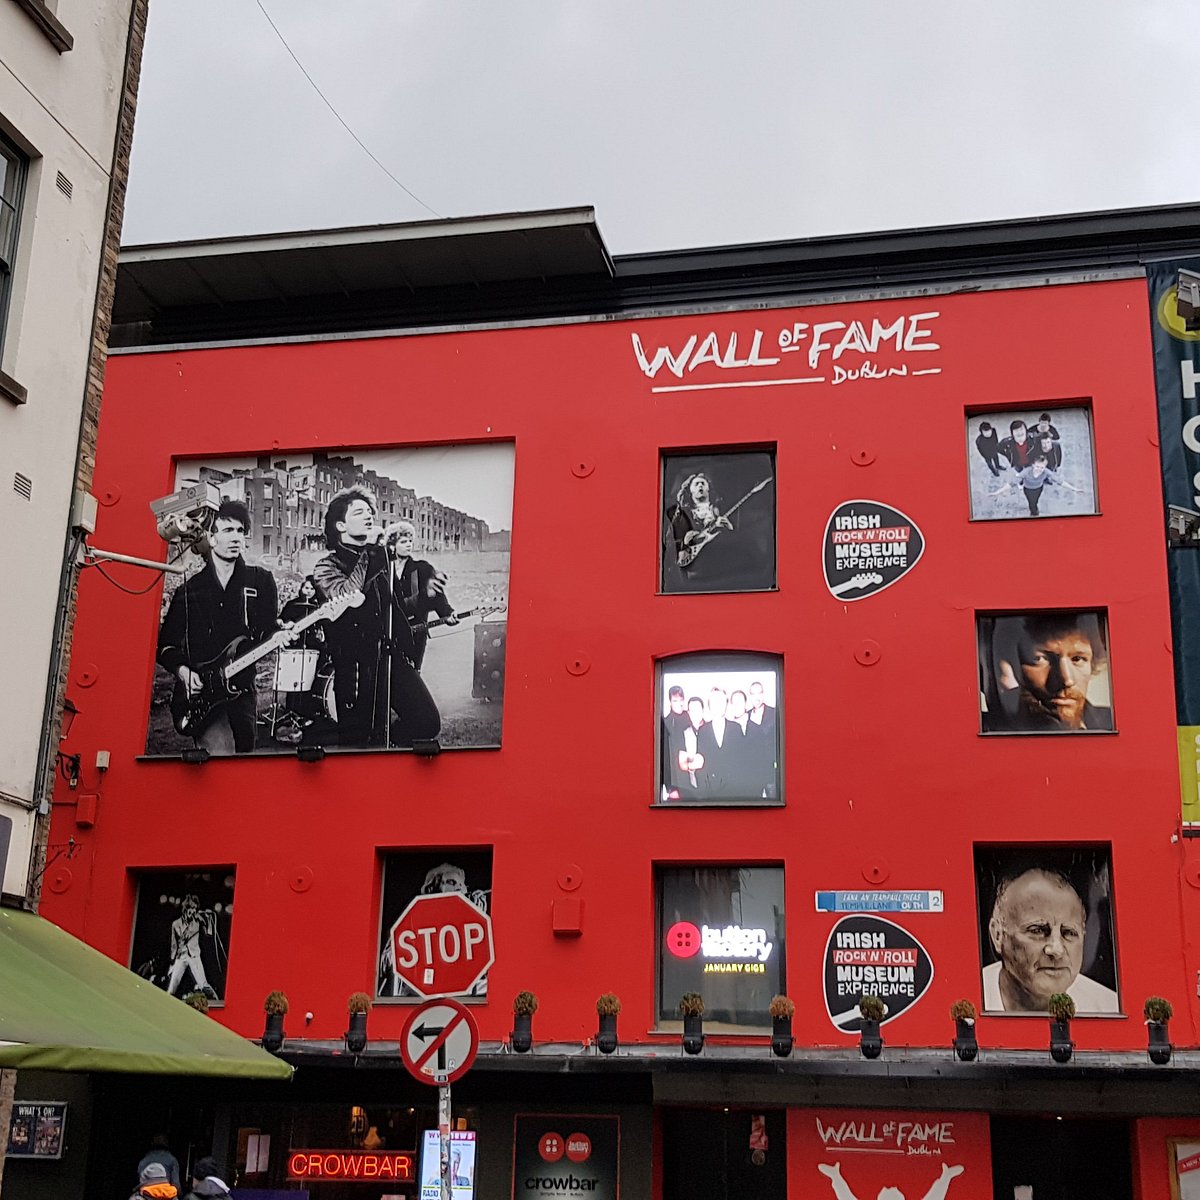 The Irish Rock 'N' Roll Museum Experience - All You Need to Know